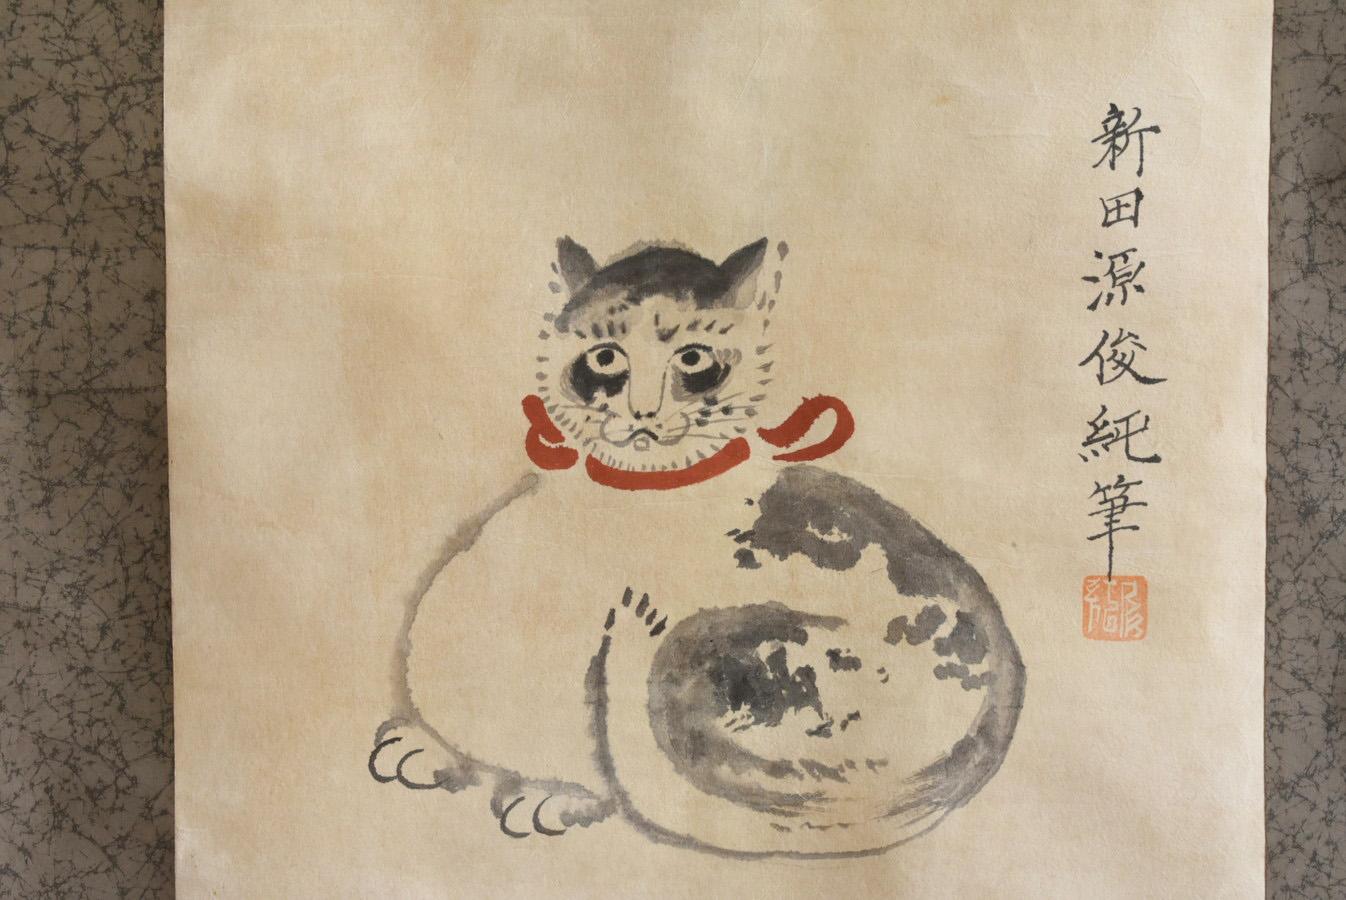 This is a picture of a cat drawn by a person named 